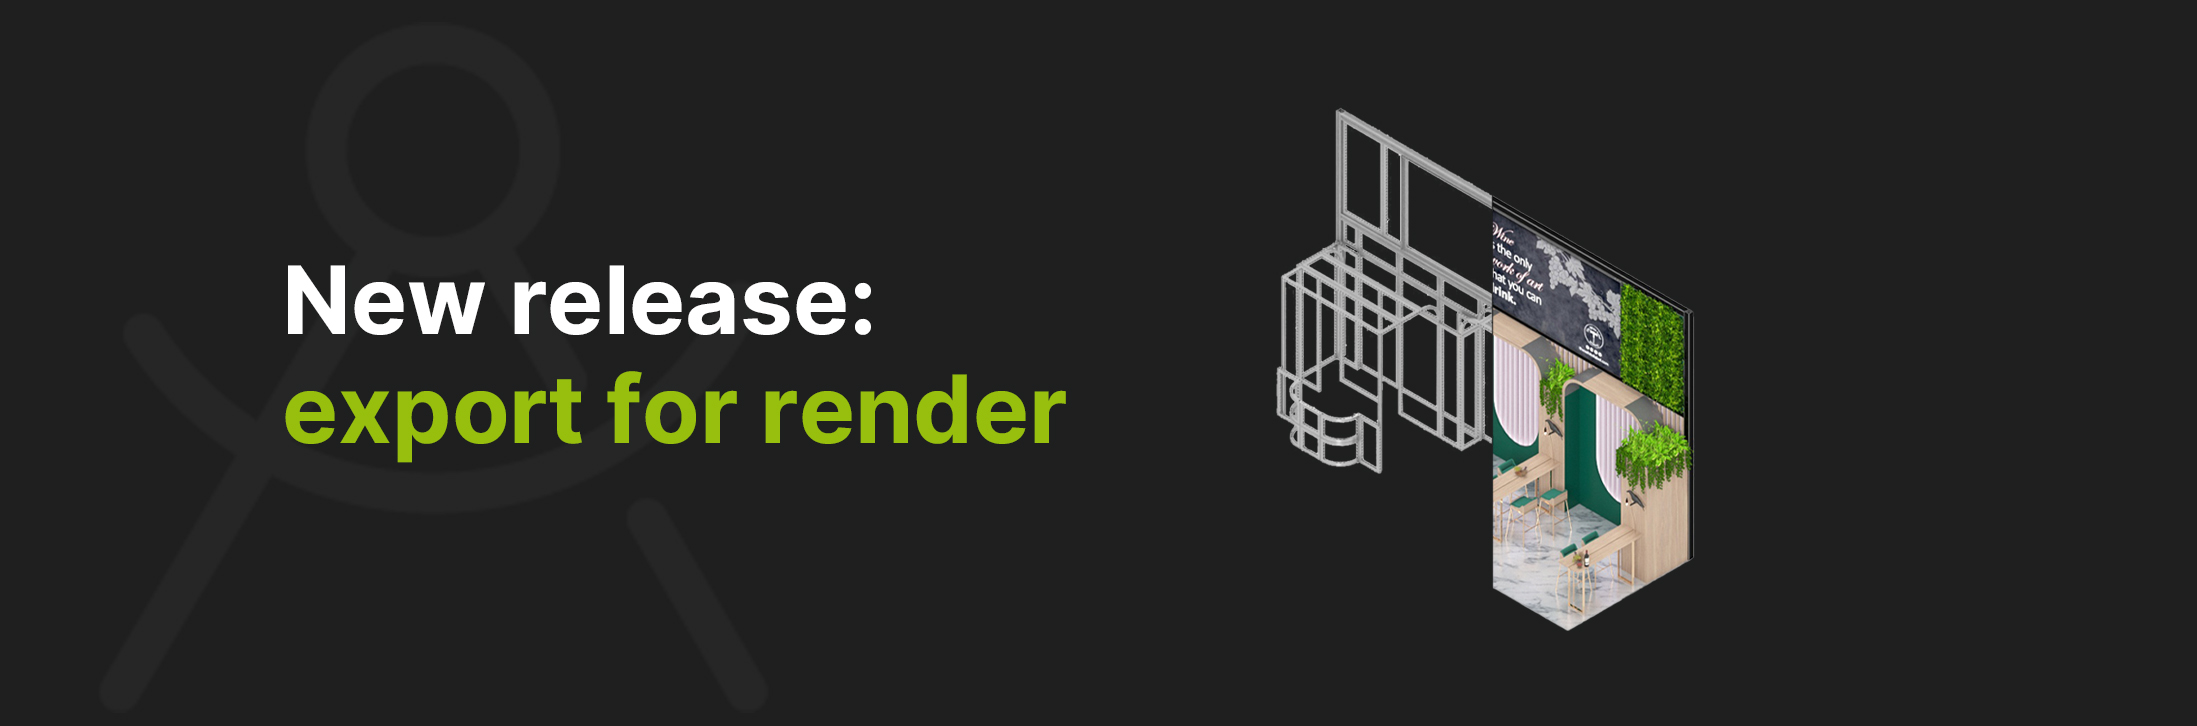 Export for render functionality